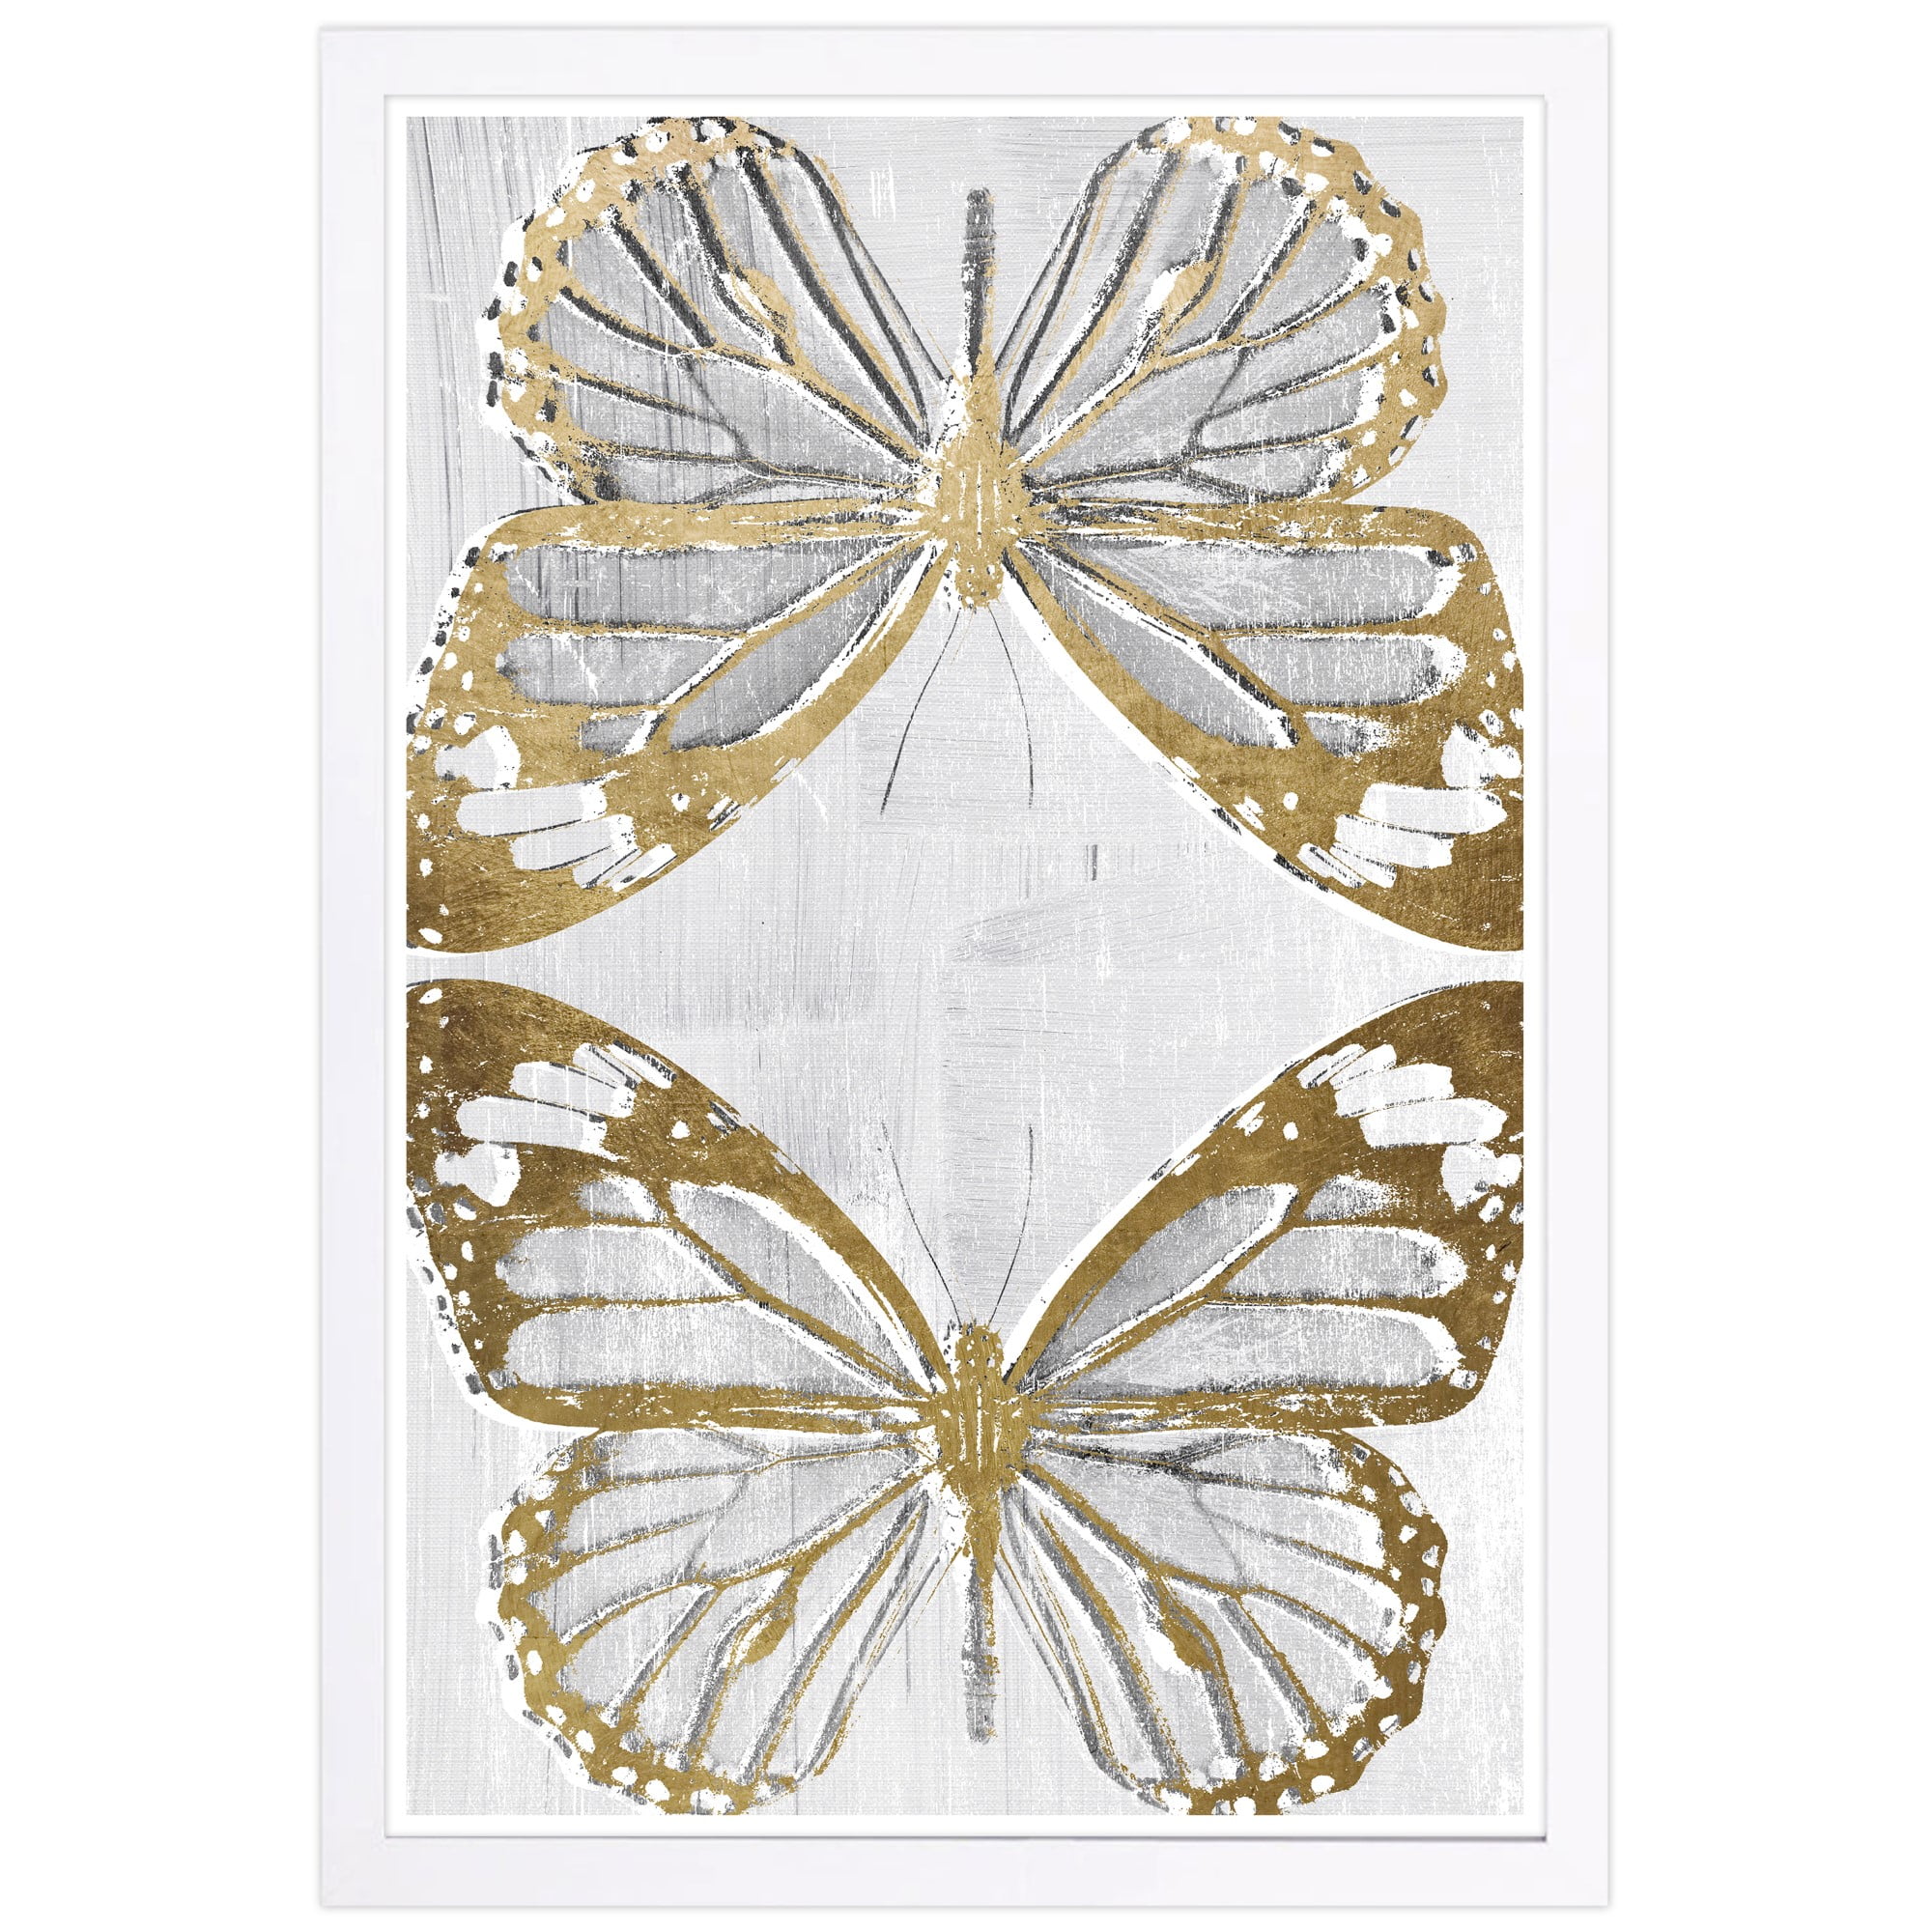 Butterfly Insect Nature Spring Canvas Poster Print Picture Room Home Wall Decor 